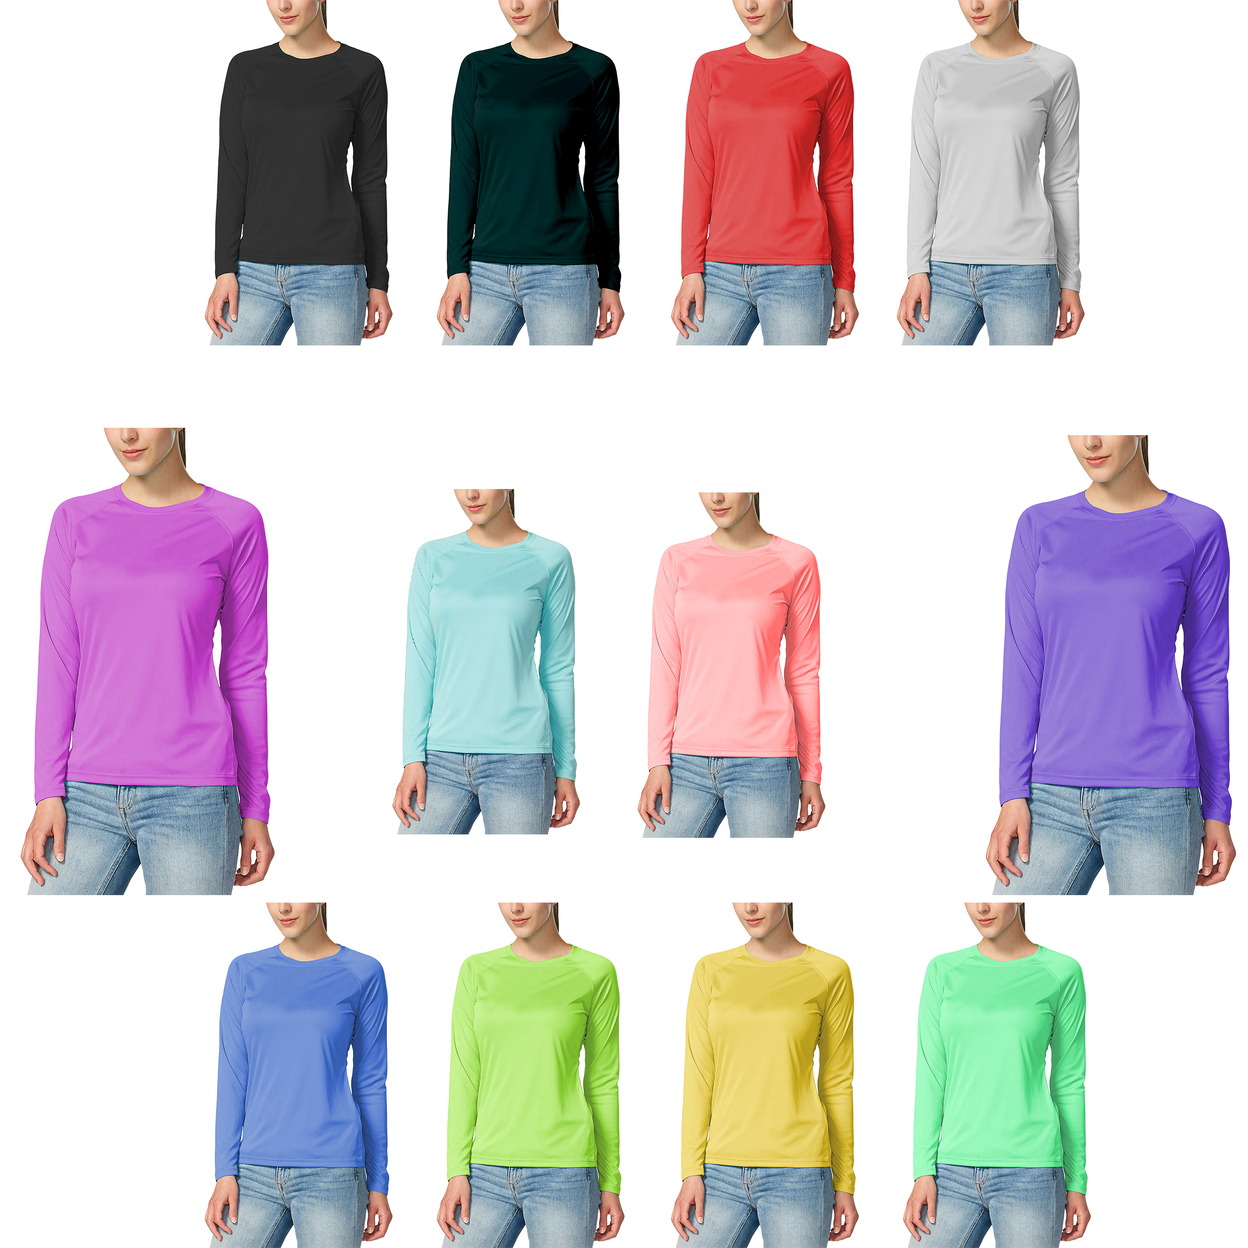 4-Pack: Women's Dri-Fit Moisture-Wicking Breathable Long Sleeve T-Shirt - X-large